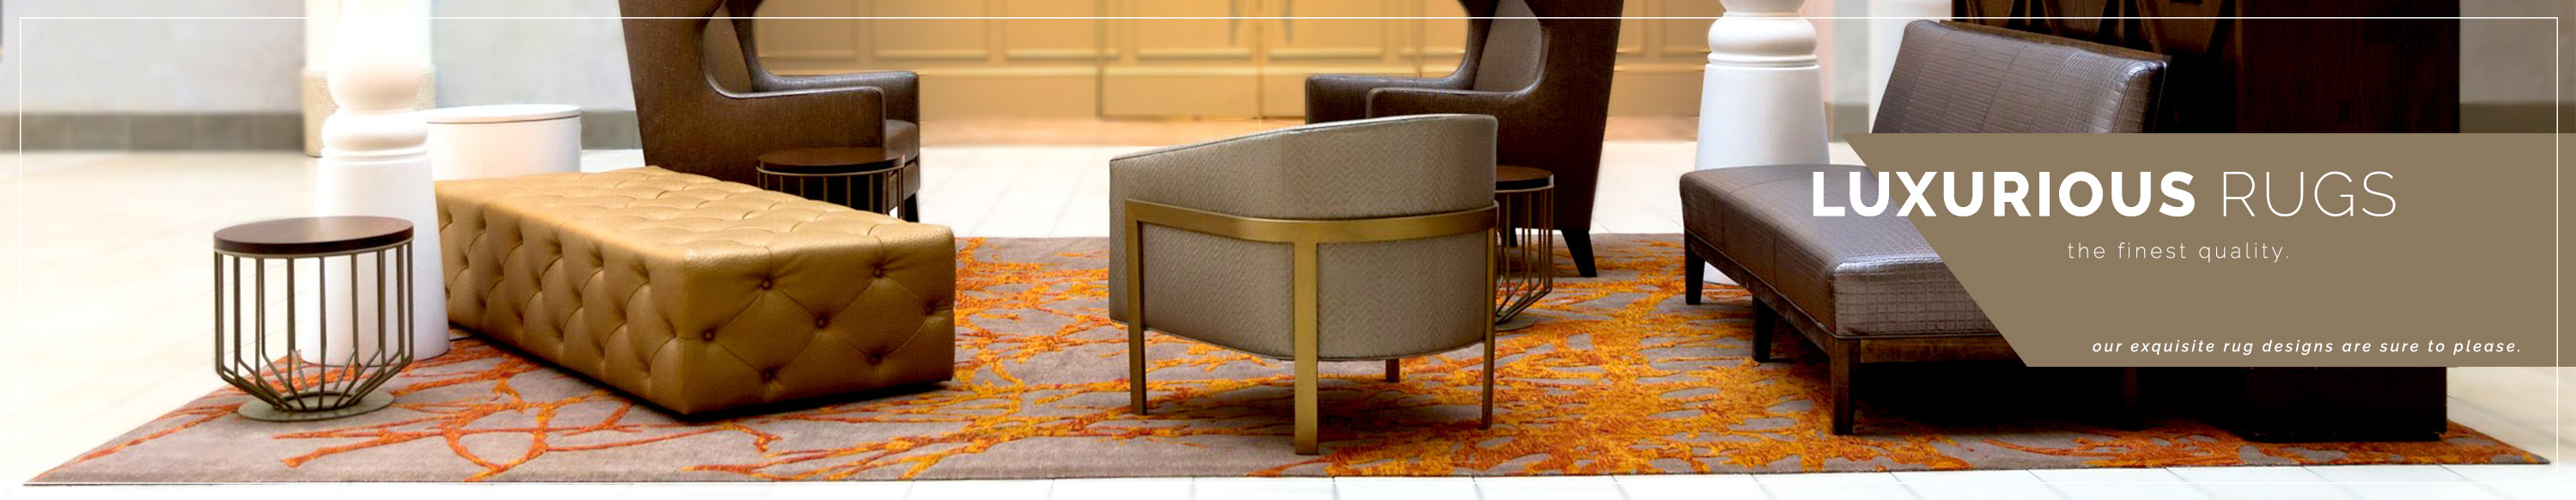 The finest quality luxury hospitality rugs. Our exquisite rug designs are sure to please.